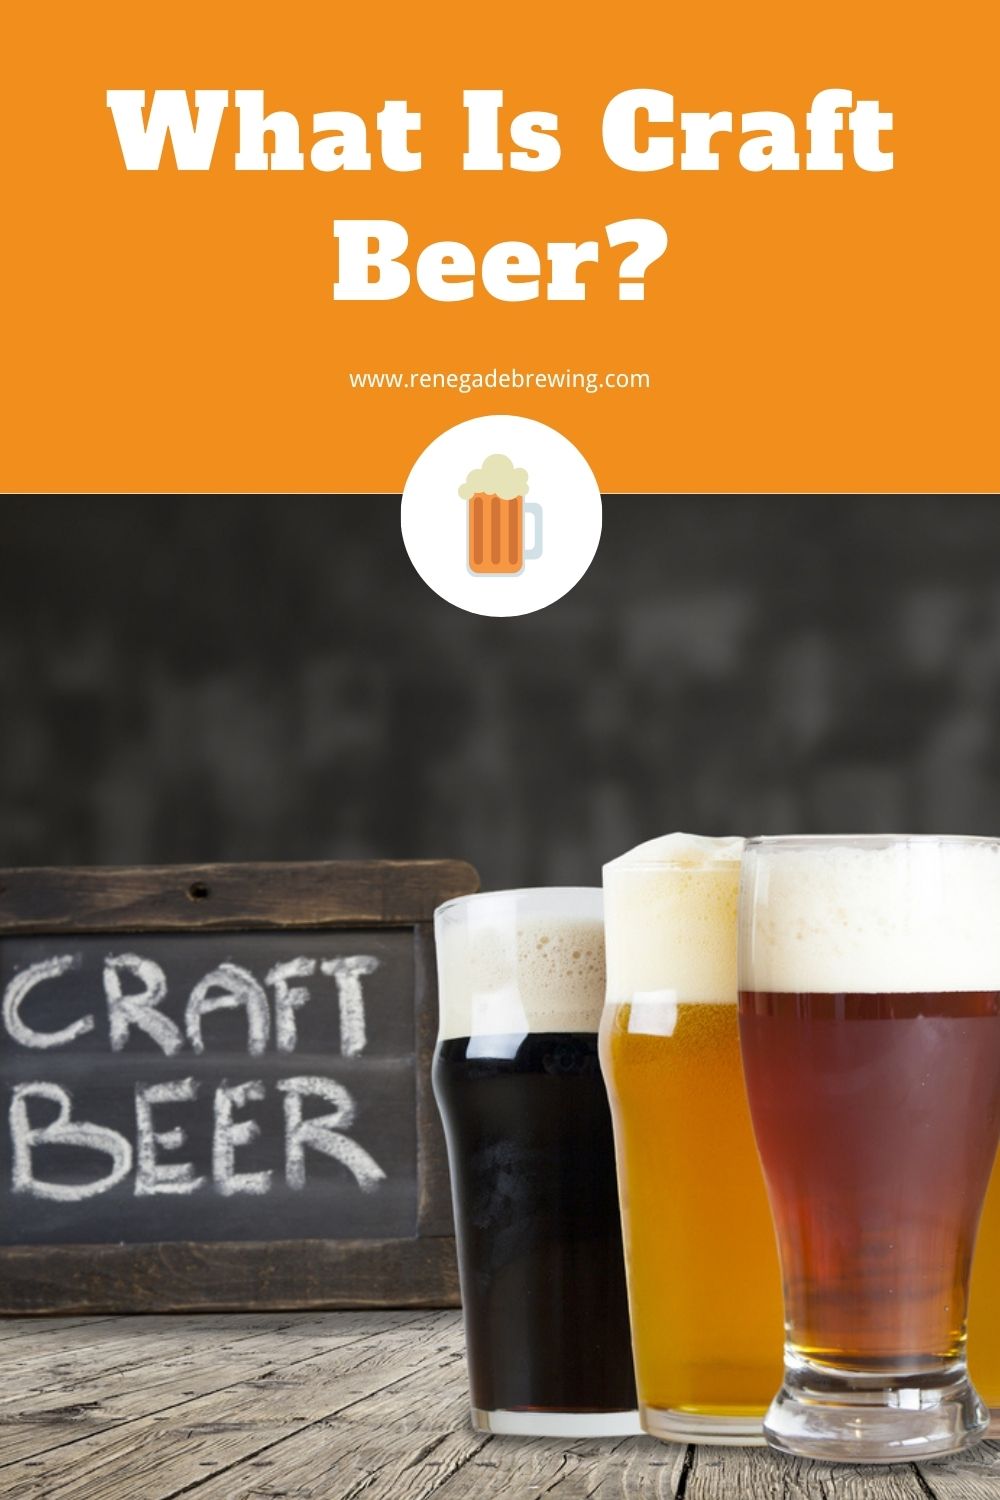 What Is Craft Beer (Characteristics, History & Types) 1